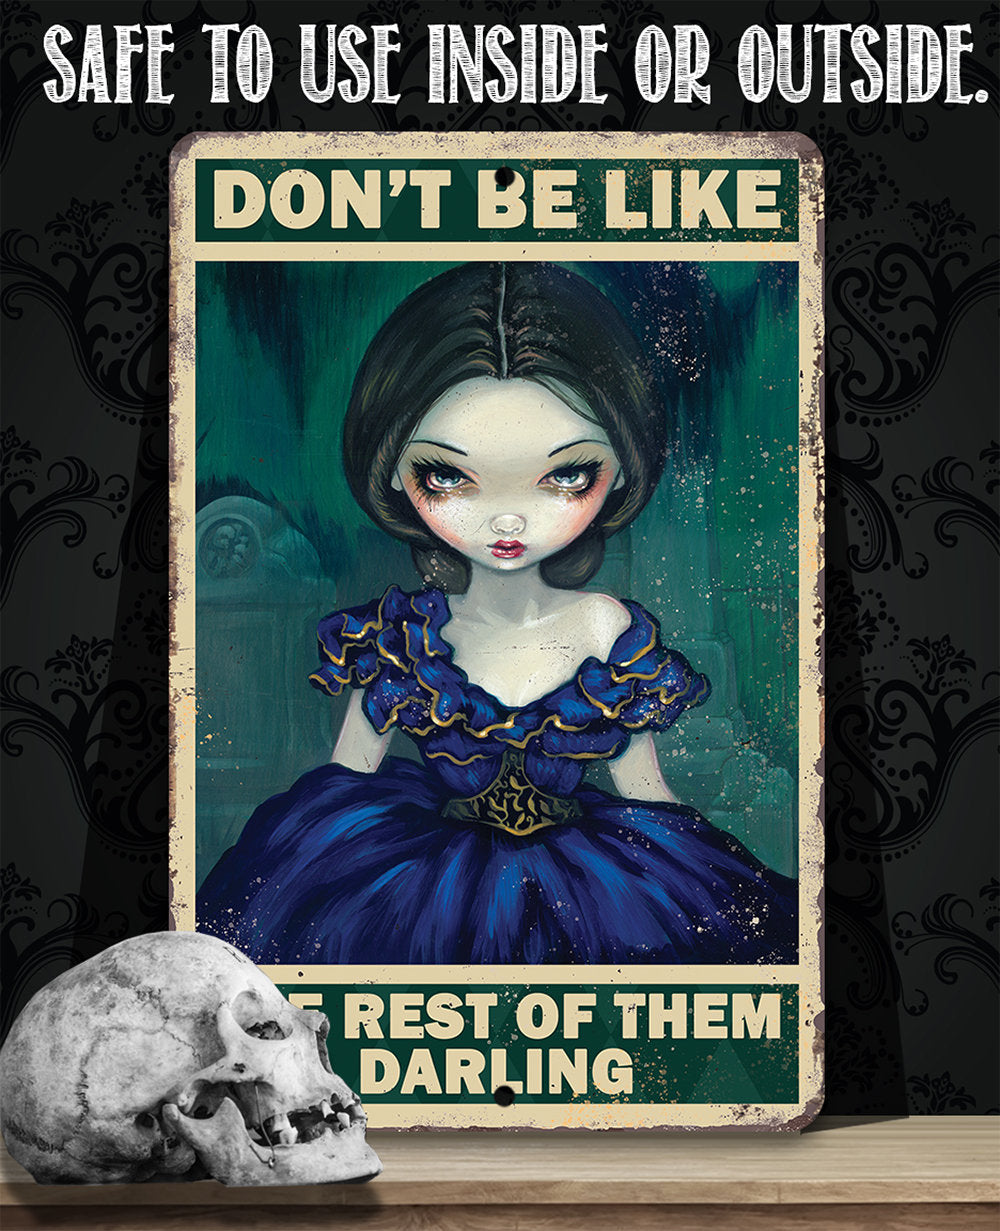 Don't Be Like The Rest of Them - Metal Sign Metal Sign Lone Star Art 